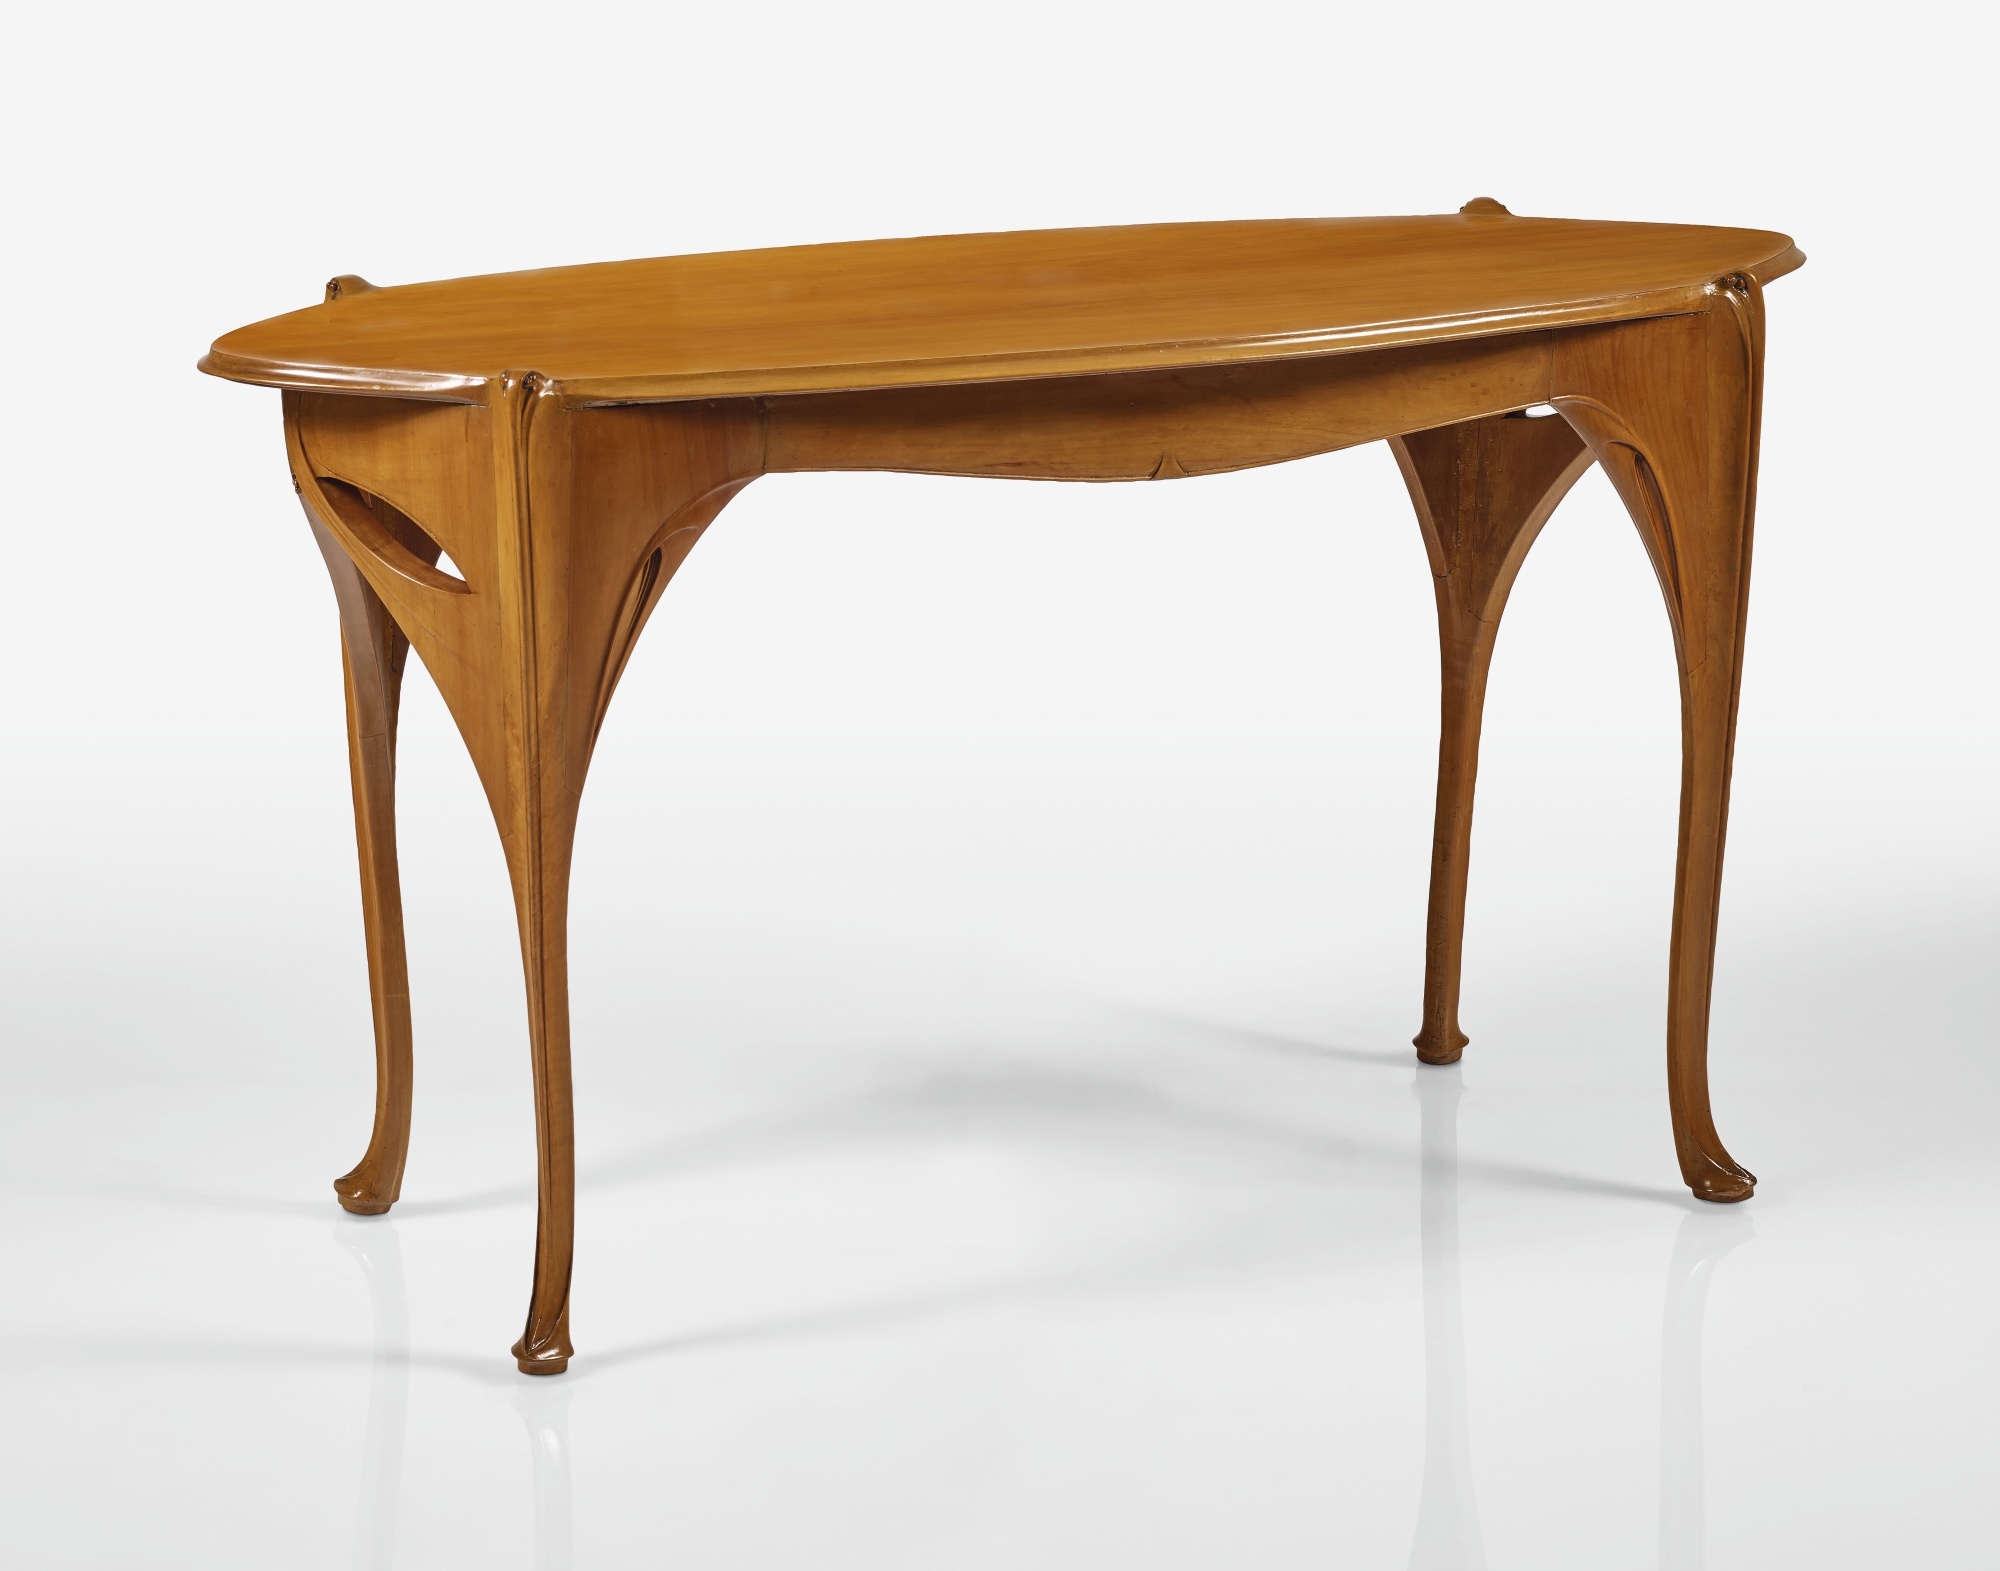 Artwork by Hector Guimard, SALON TABLE, Made of pearwood